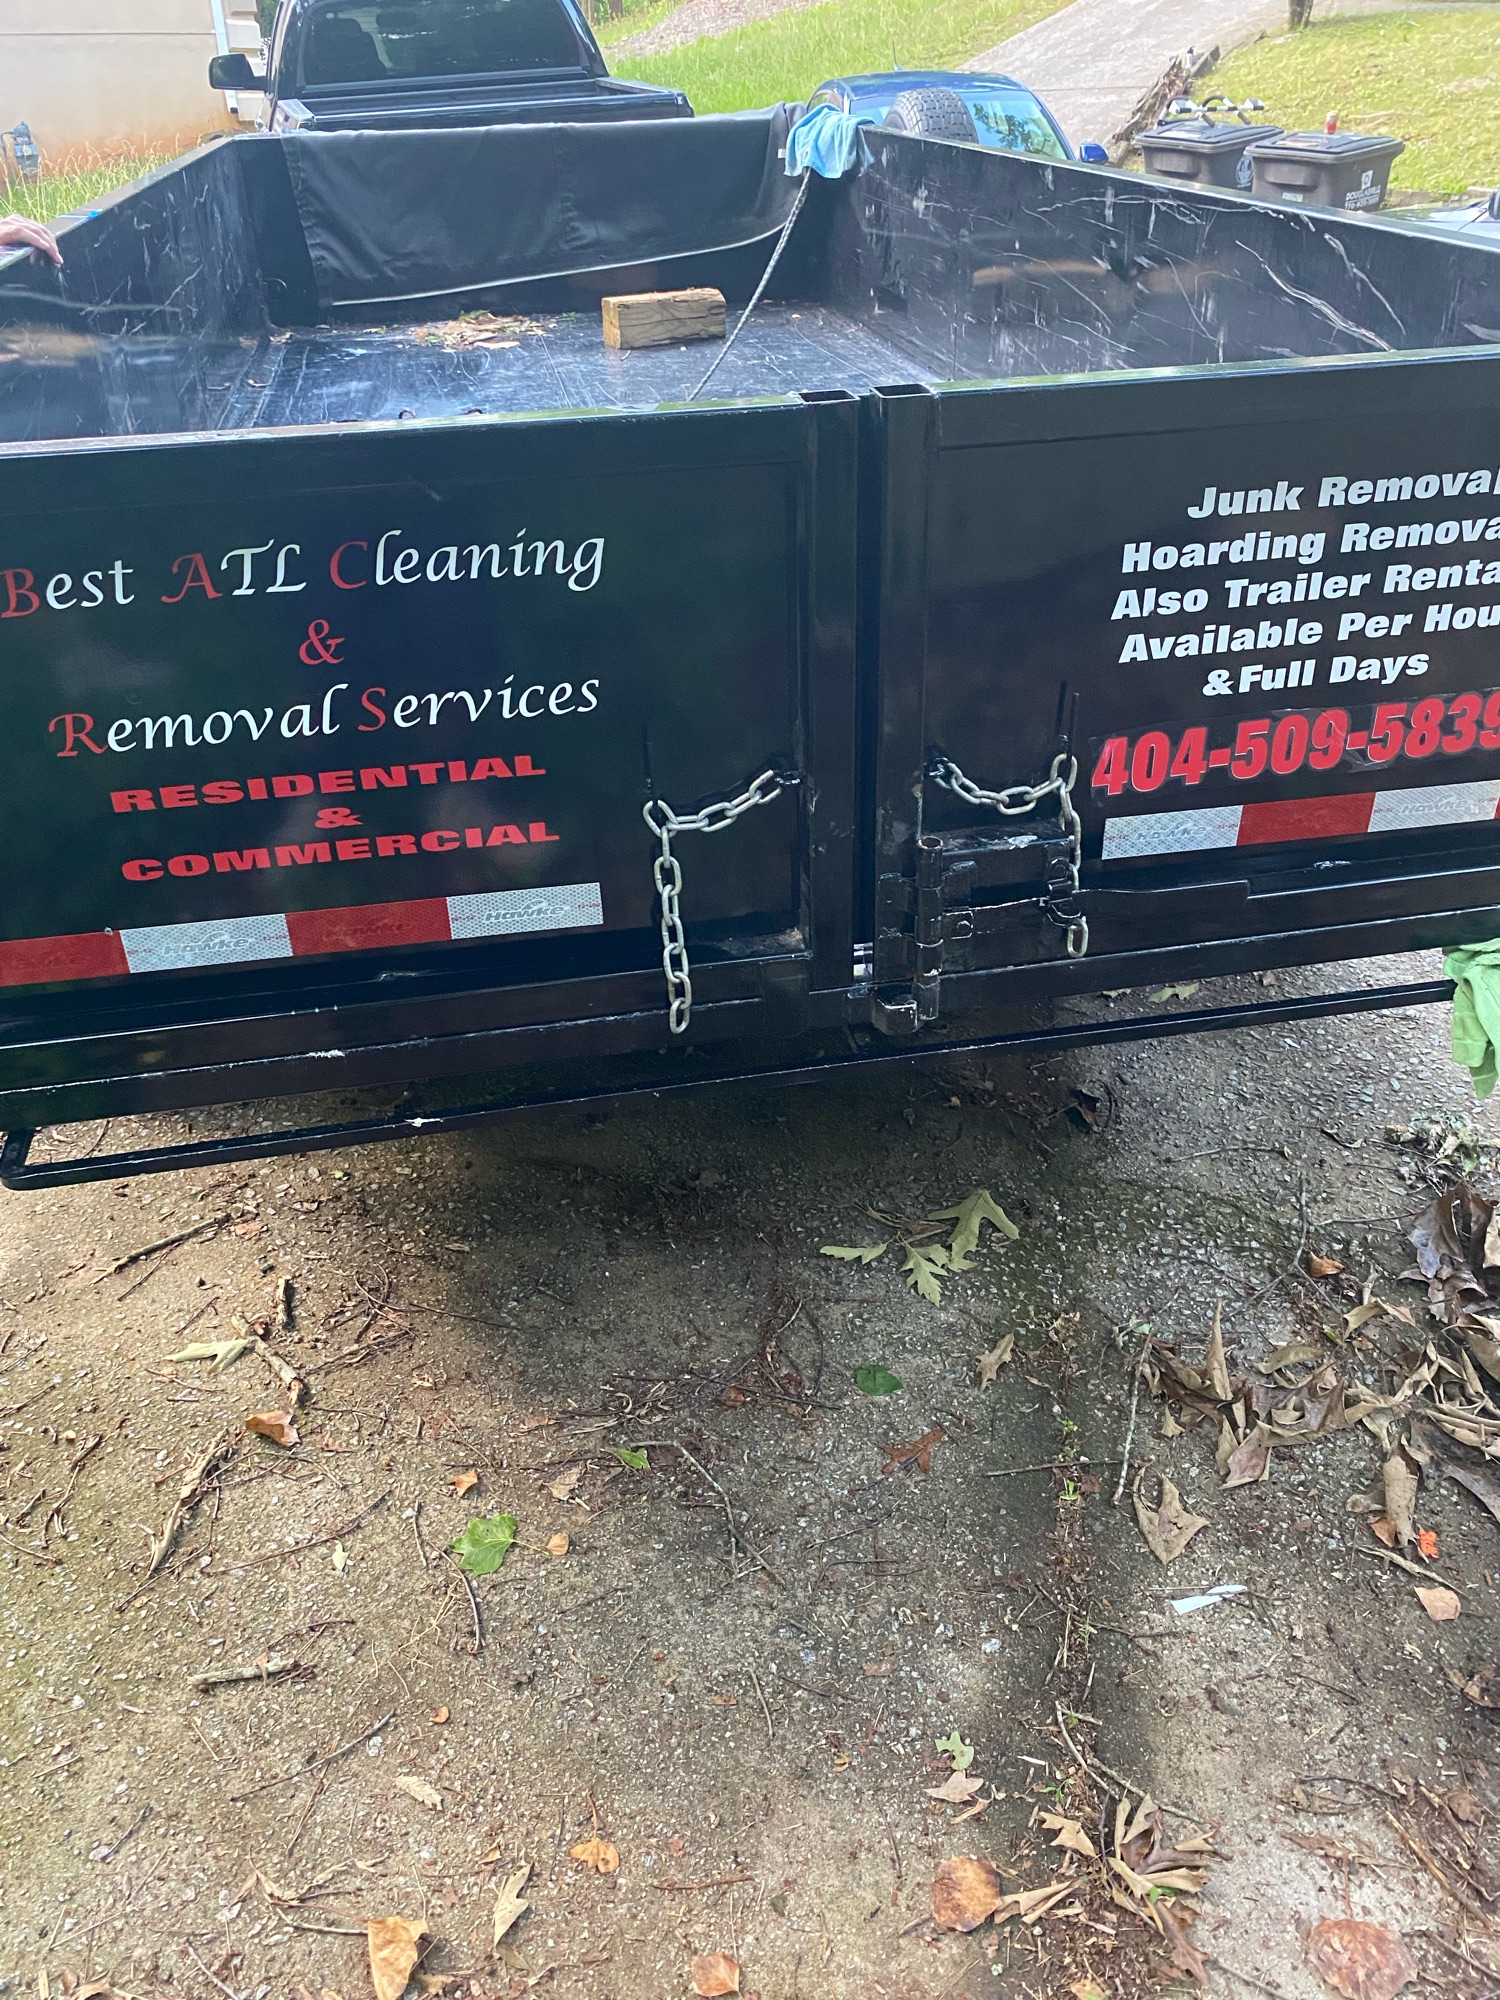 Best ATL Cleaning Services Logo